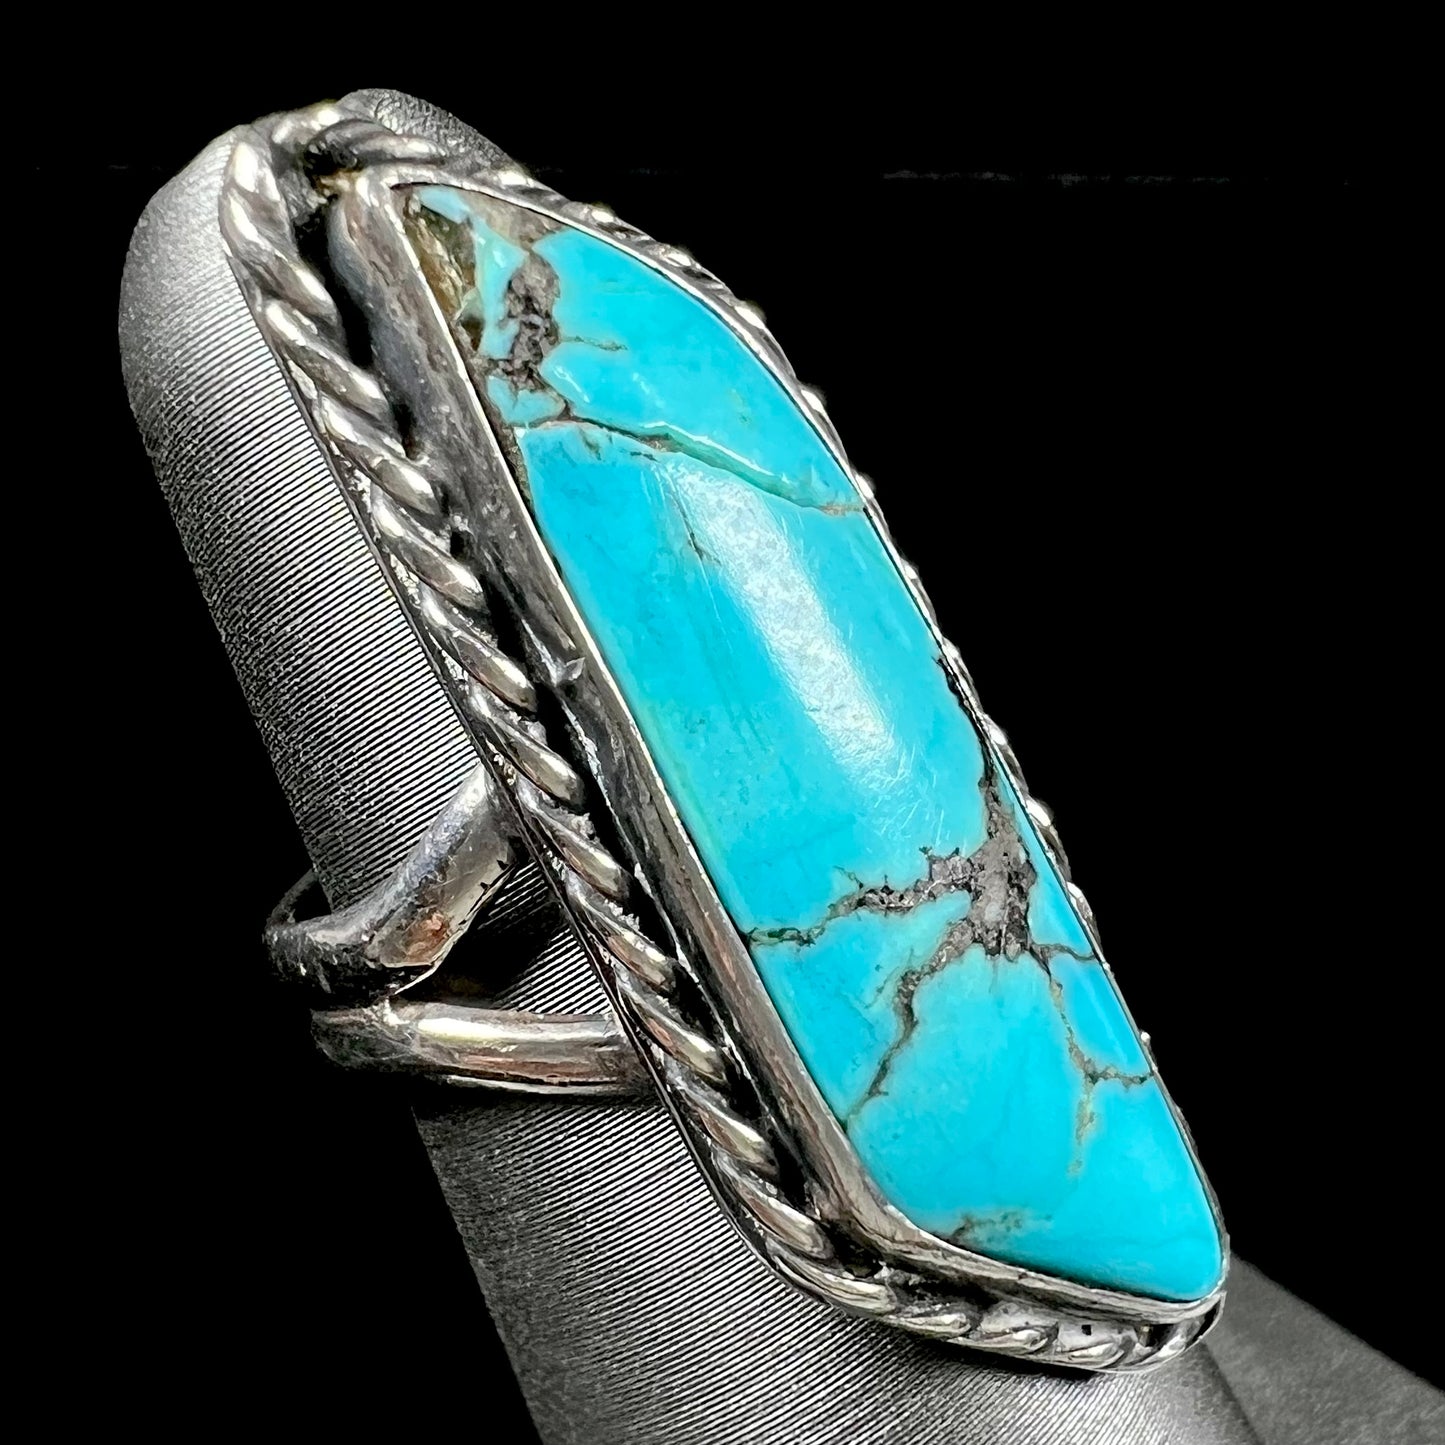 A vintage, Southwest style sterling silver ring set with a natural turquoise stone.  The stone is blue with a black matrix.